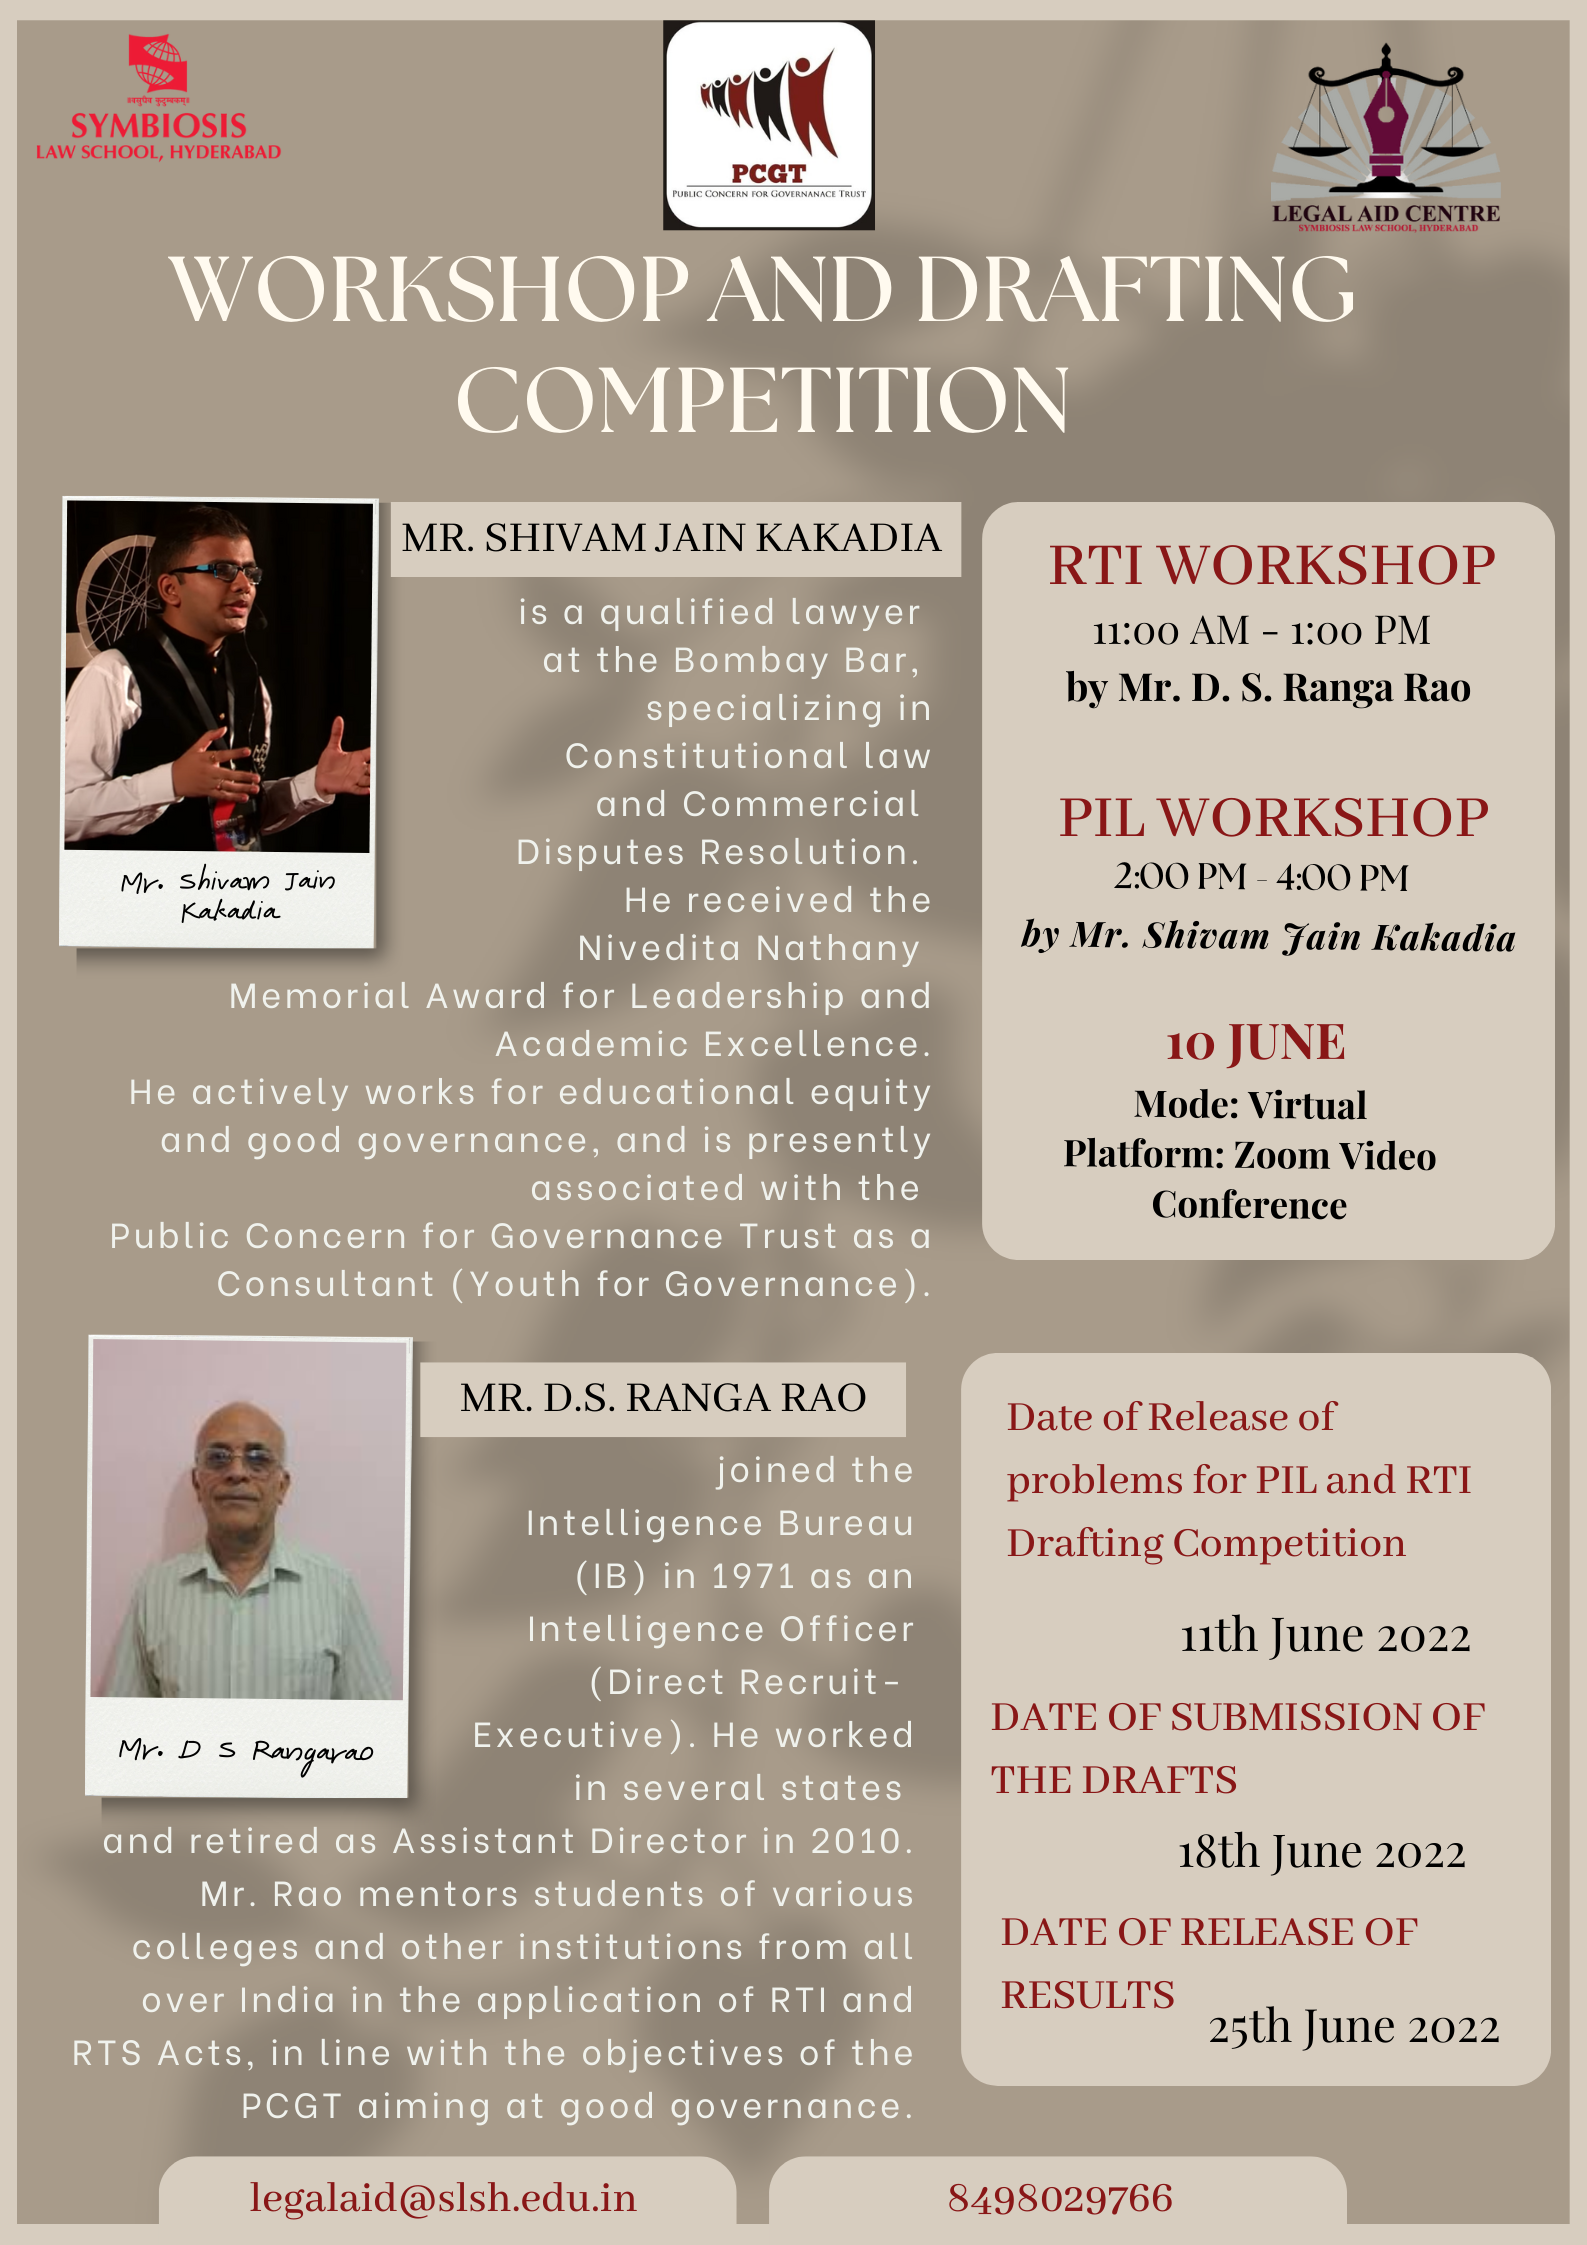 Workshop and Drafting  Competition - SLS Hyderbad